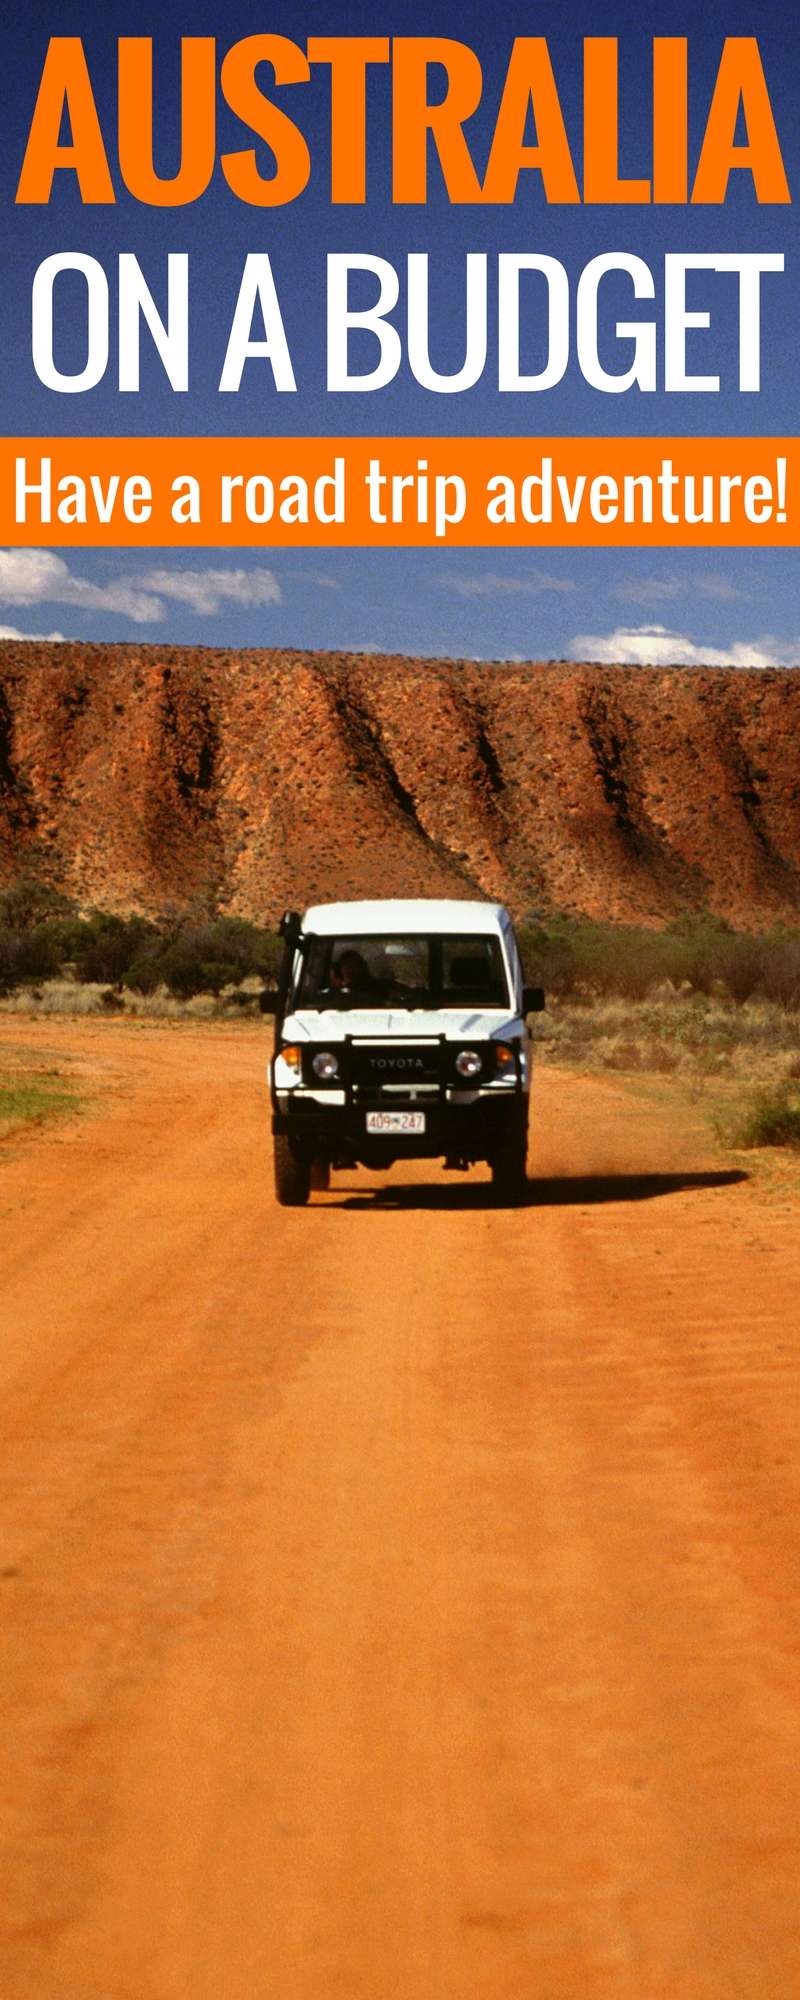 How to road trip Australia on a budget. Australia can be expensive and driving around Australia in a van or RV or campervan can really cut the cost! Tips for driving around Australia in campervan. Australia Road Trip | Tips | Travel | Australia travel | roadtrip | budget #australia #travel #traveltips #roadtrip #wanderlust #adventure #vanlife